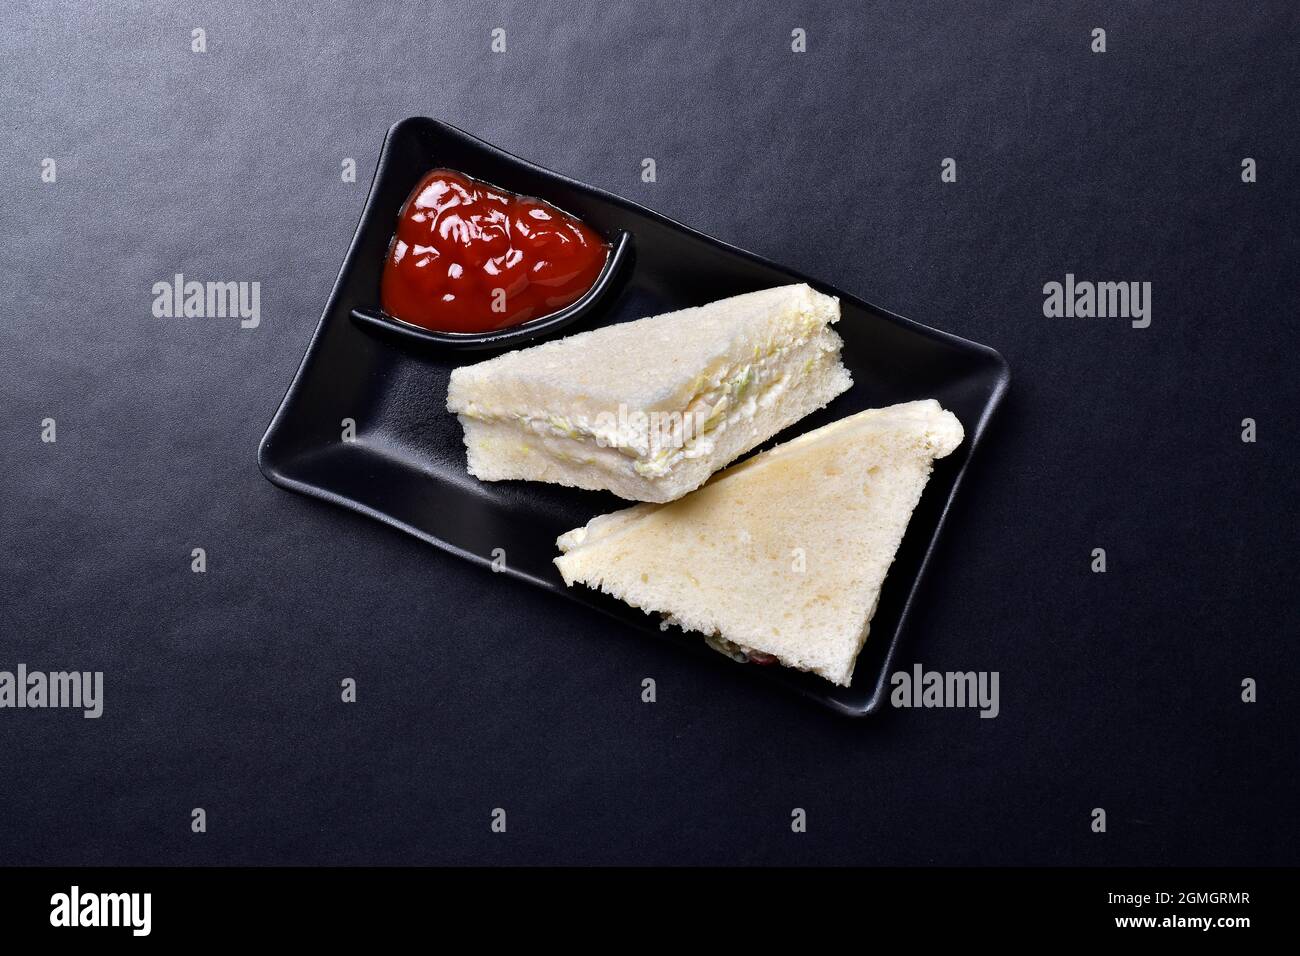 White Bread Sandwich Served with Ketchup Stock Photo